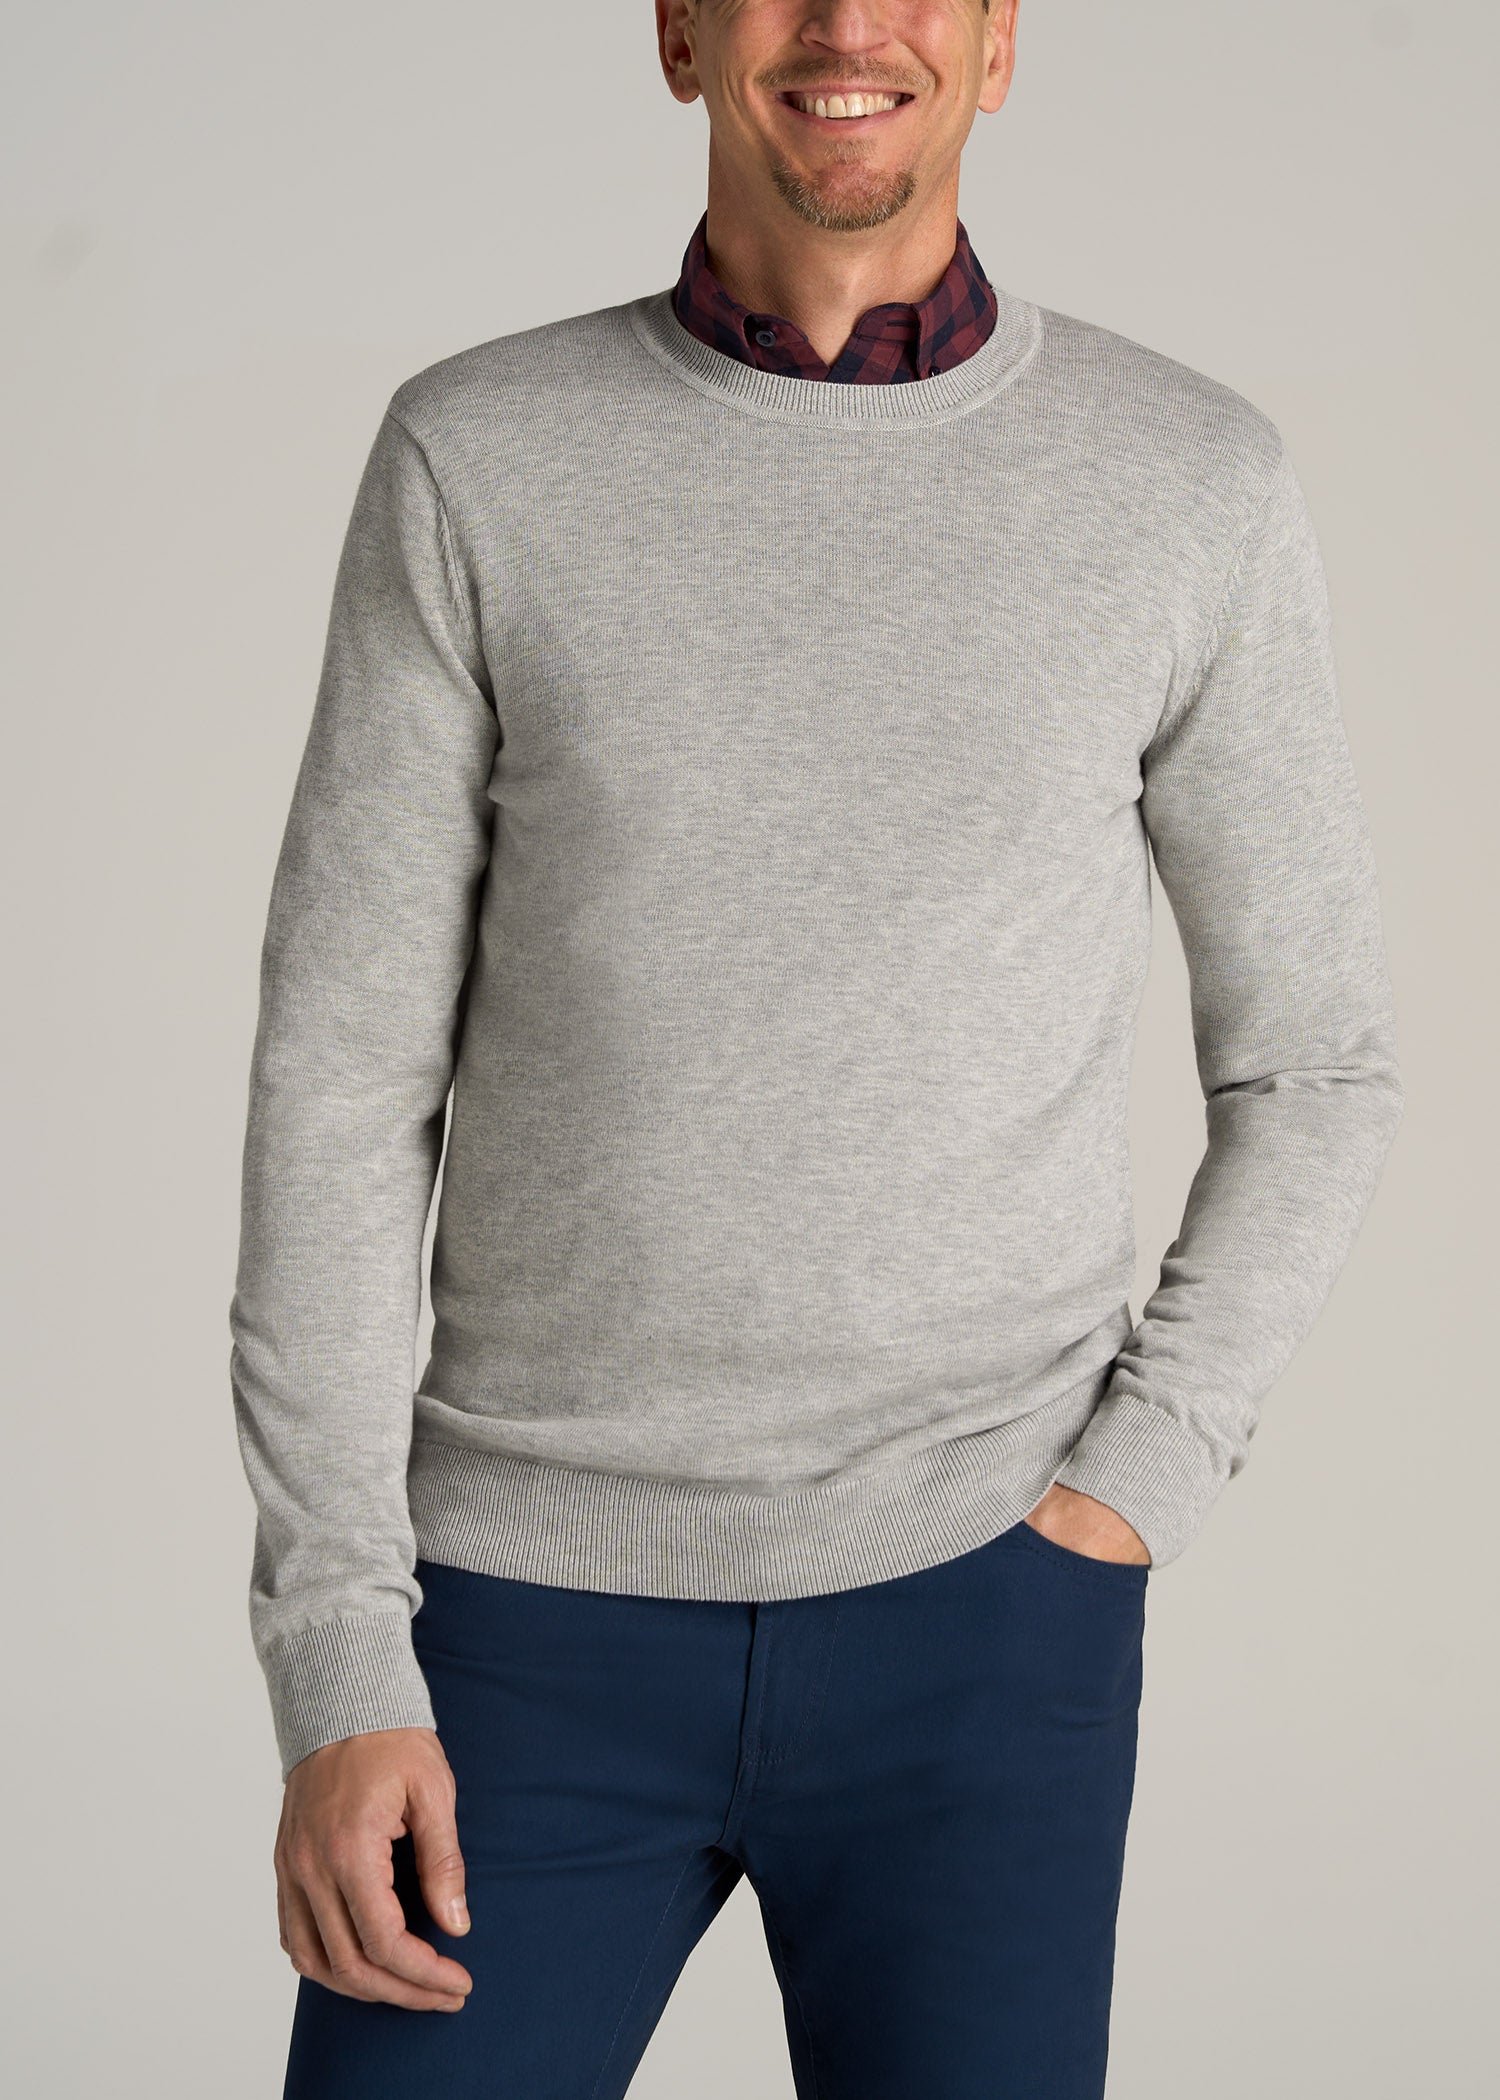 Everyday Crewneck Tall Men's Sweater in Grey Mix